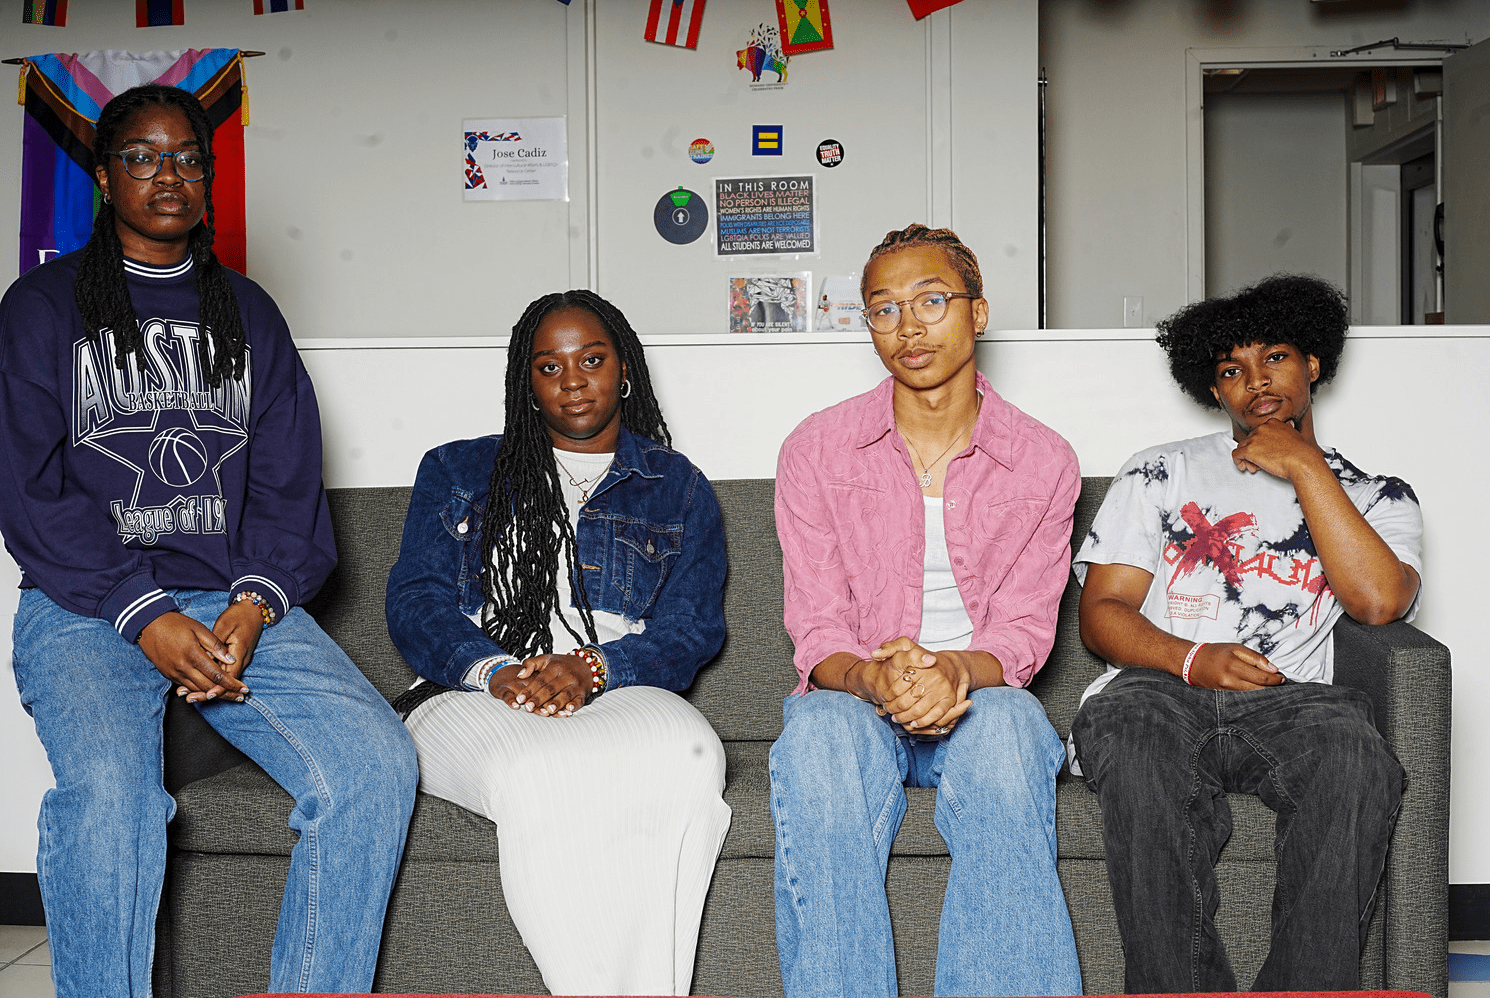 LGBTQ identifying students pose in Howard University's Intercultural and LGBTQ Resource Center